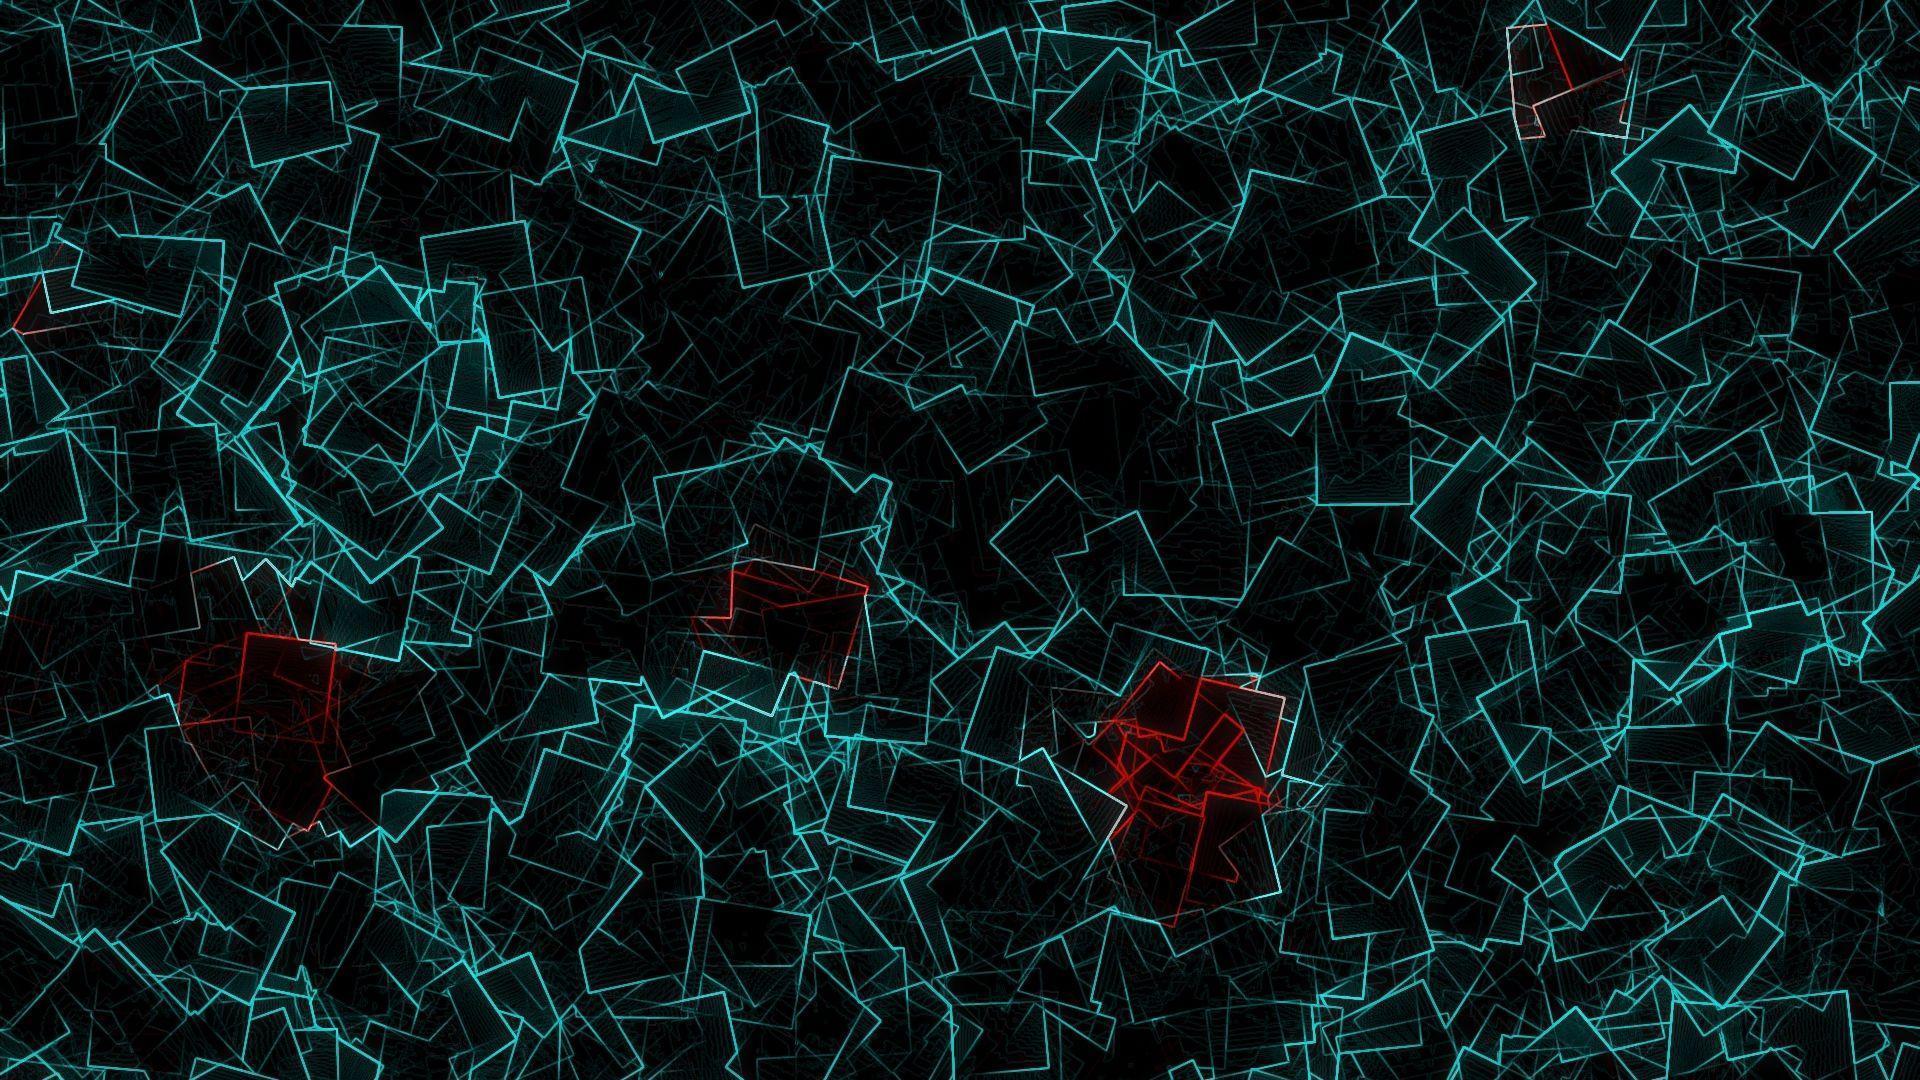 Download Wallpaper 1920x1080 Abstraction, Teal, Red, Maze Full HD